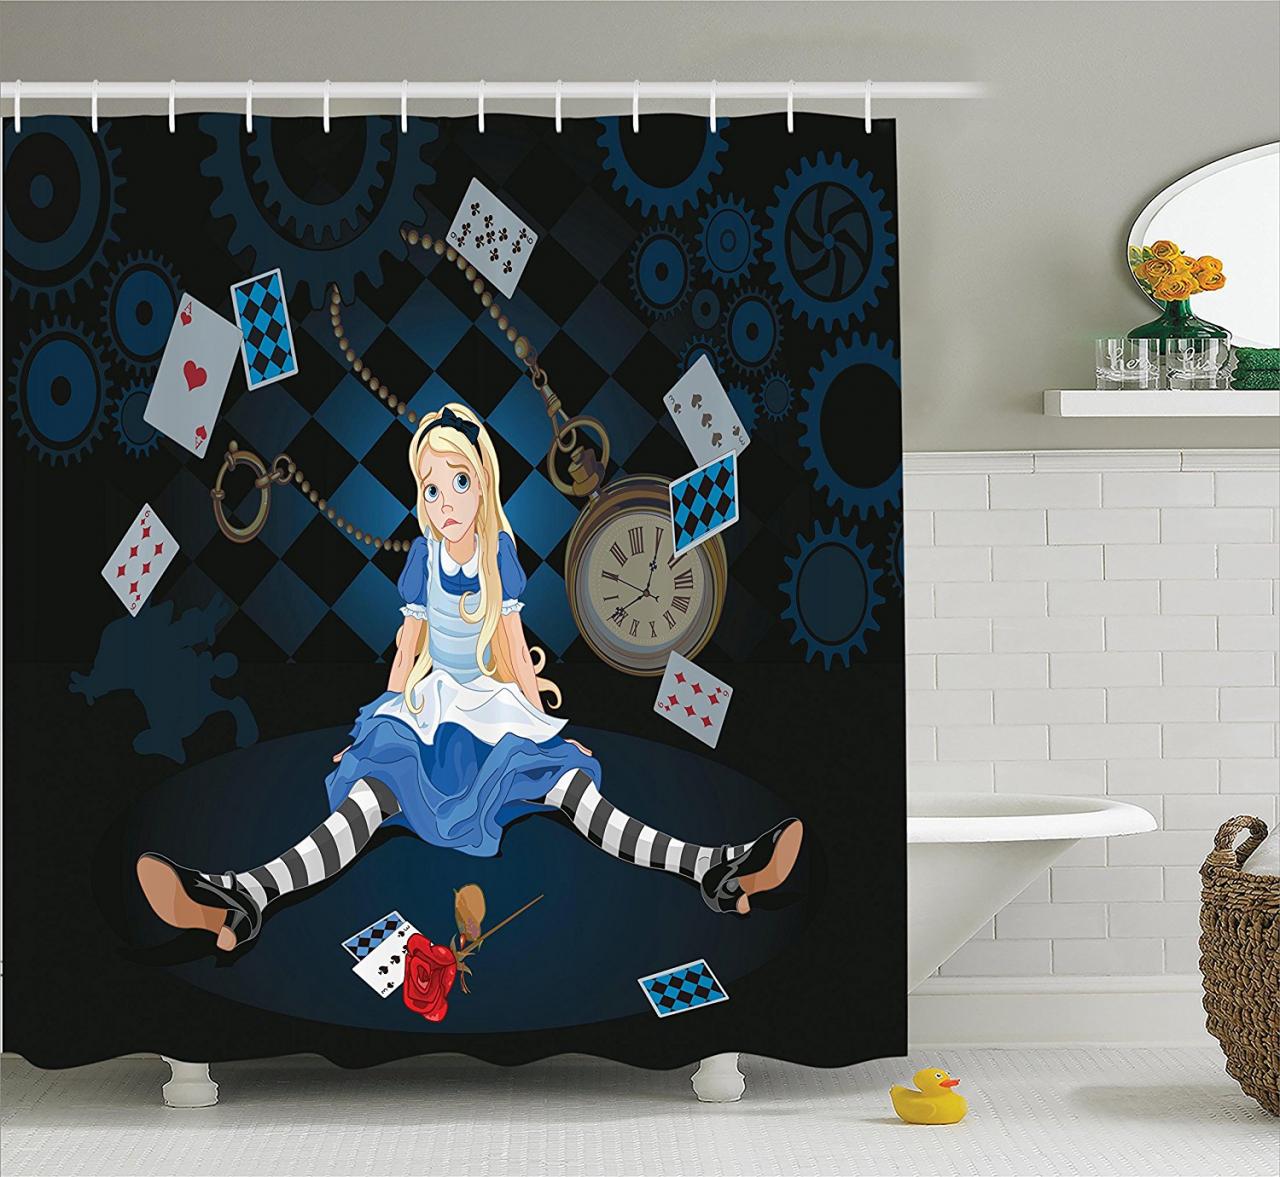 Alice in Wonderland Decorations Shower Curtain Set By , Grown Size